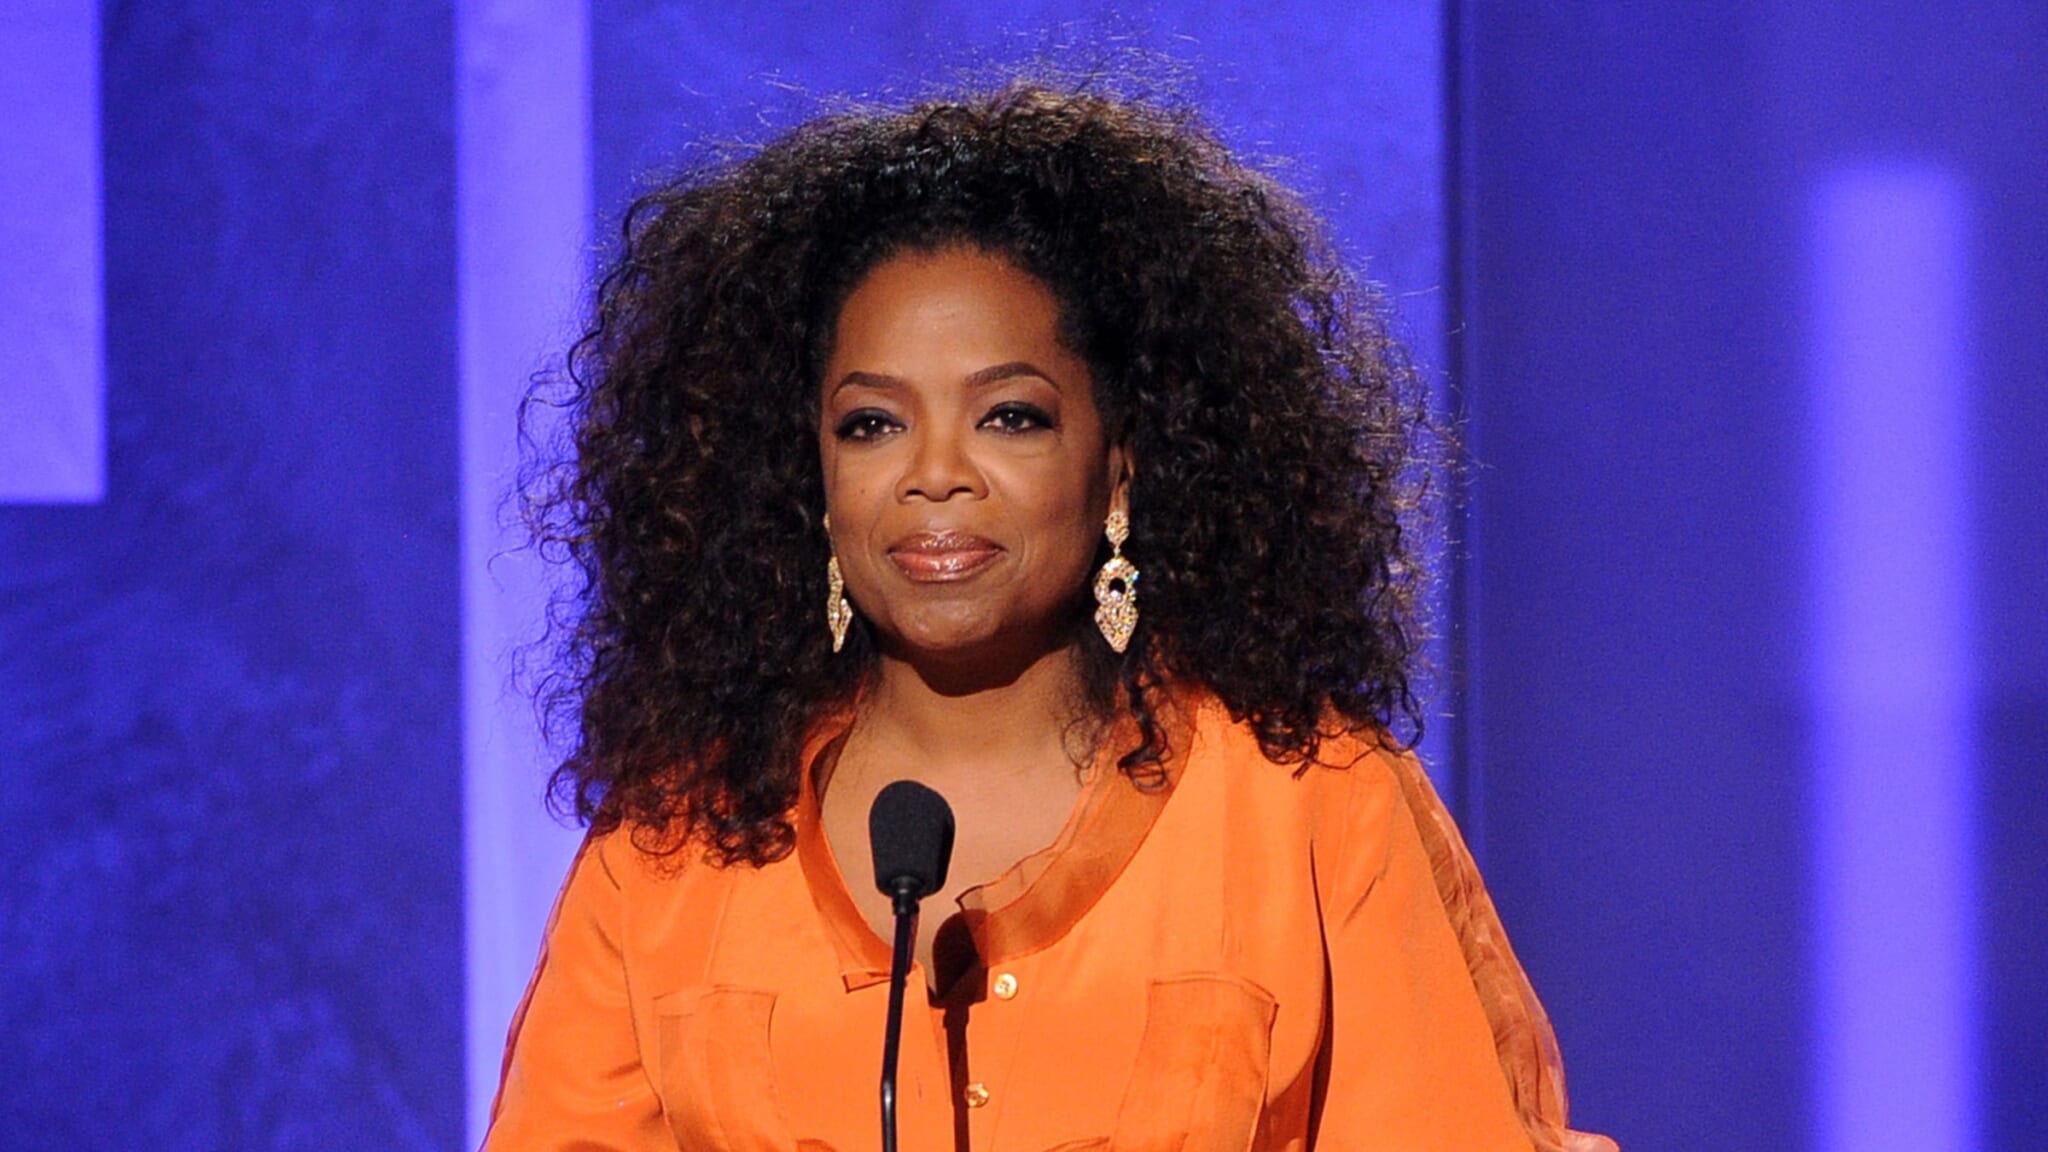 Oprah Winfrey donates $500,000 to March For Our Lives after school ...